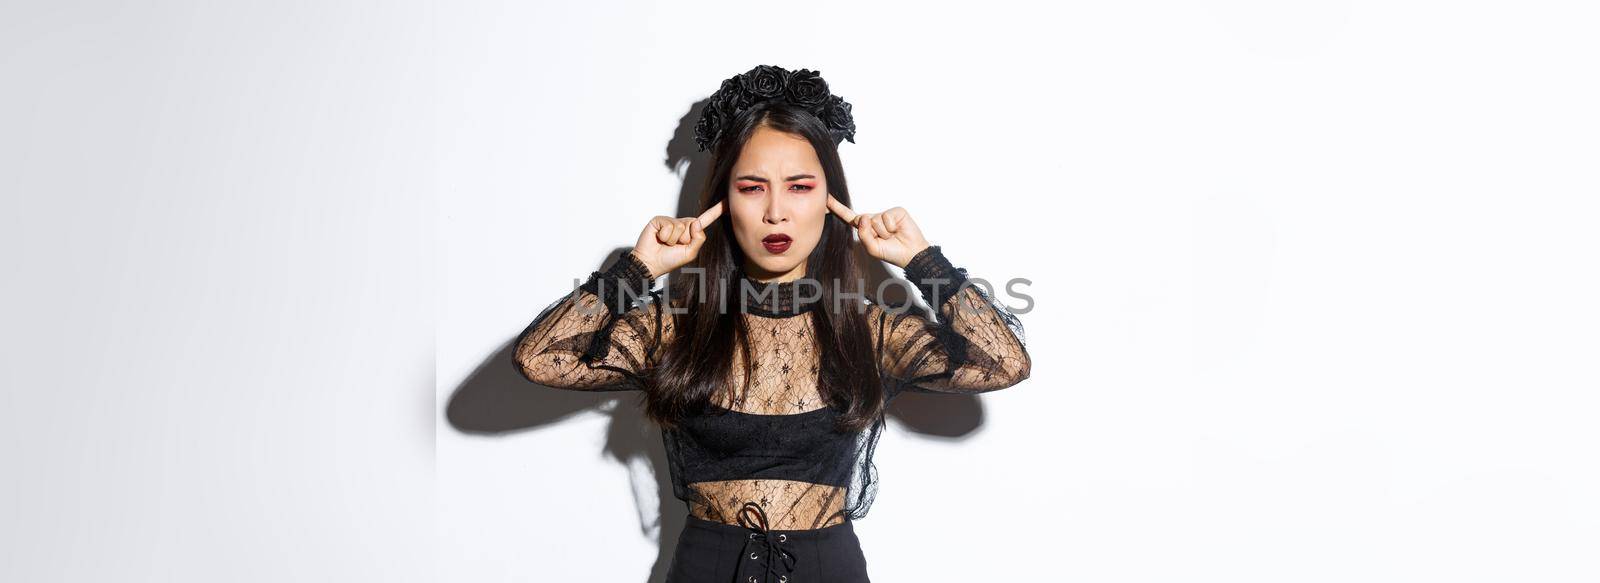 Annoyed and mad asian woman in witch halloween costume shut ears and frowning angry, standing bothered by something loud, complaining on noise over white background by Benzoix